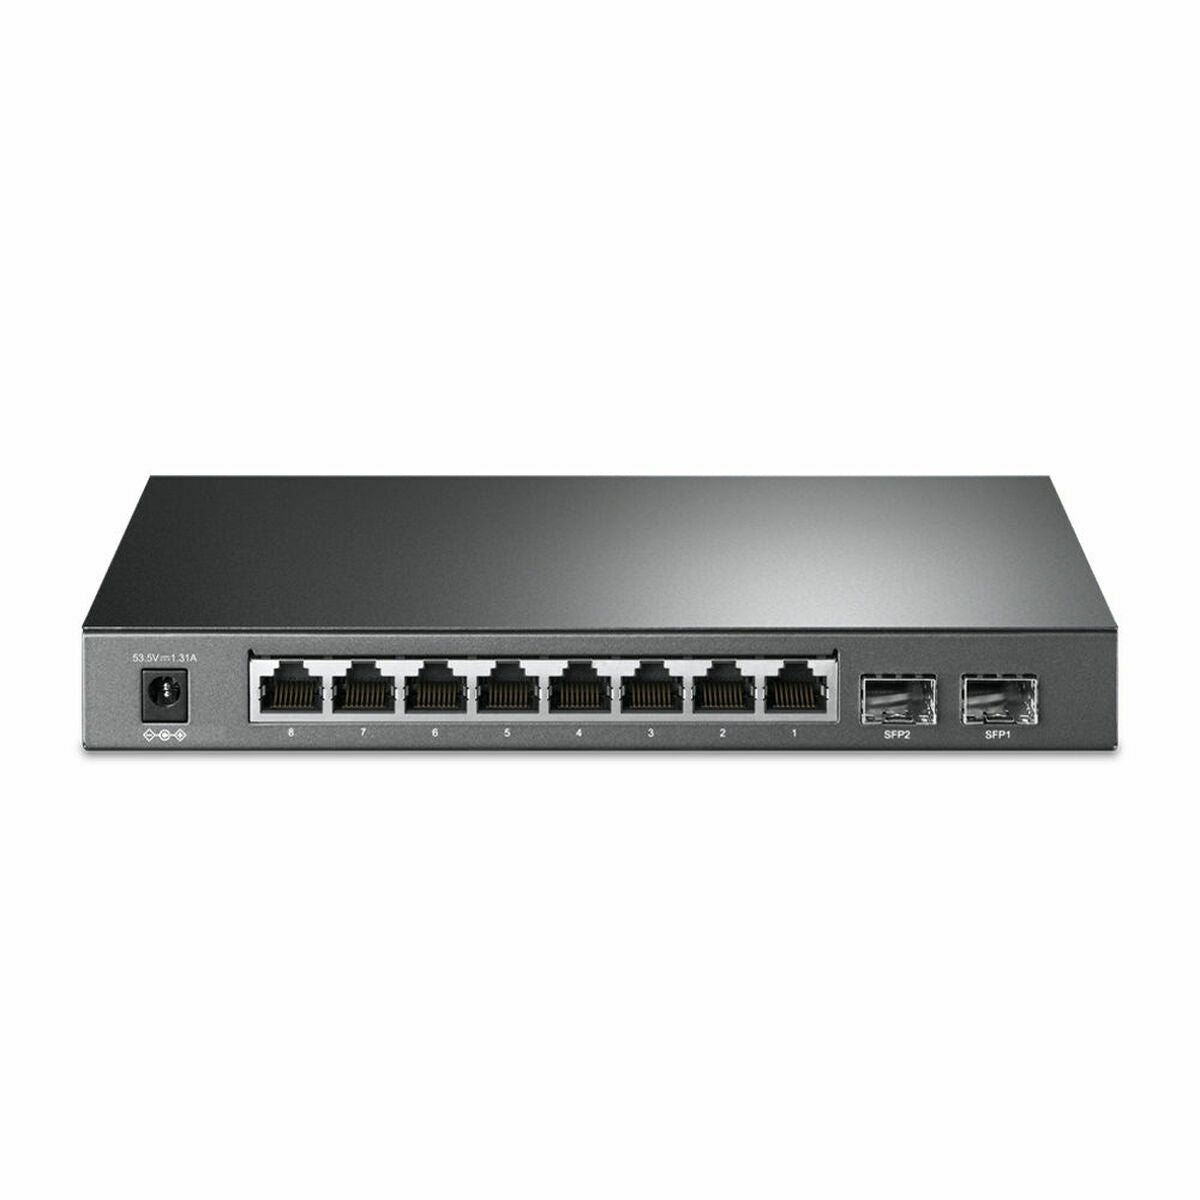 Switch TP-Link T1500G-10PS, TP-Link, Computing, Network devices, switch-tp-link-t1500g-10ps, Brand_TP-Link, category-reference-2609, category-reference-2803, category-reference-2827, category-reference-t-19685, category-reference-t-19914, Condition_NEW, networks/wiring, Price_100 - 200, Teleworking, RiotNook